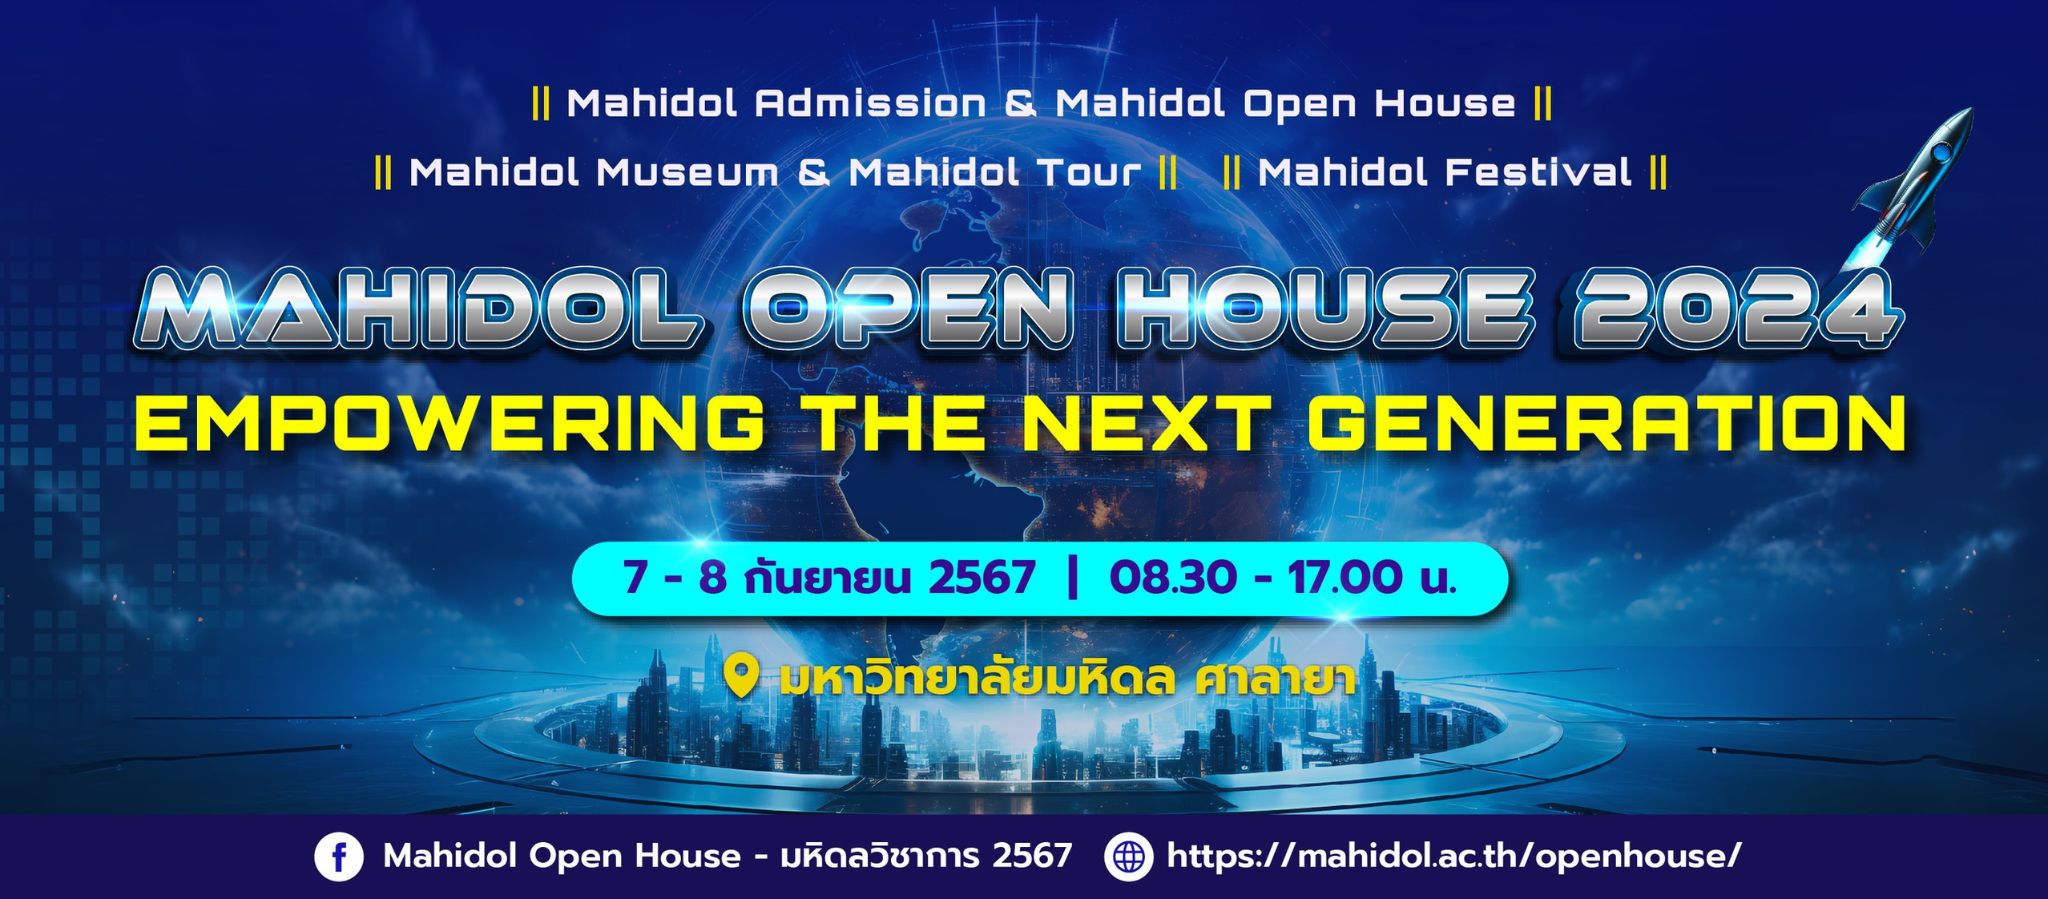 Mahidol Open House 2024 - Empowering the Next Generation